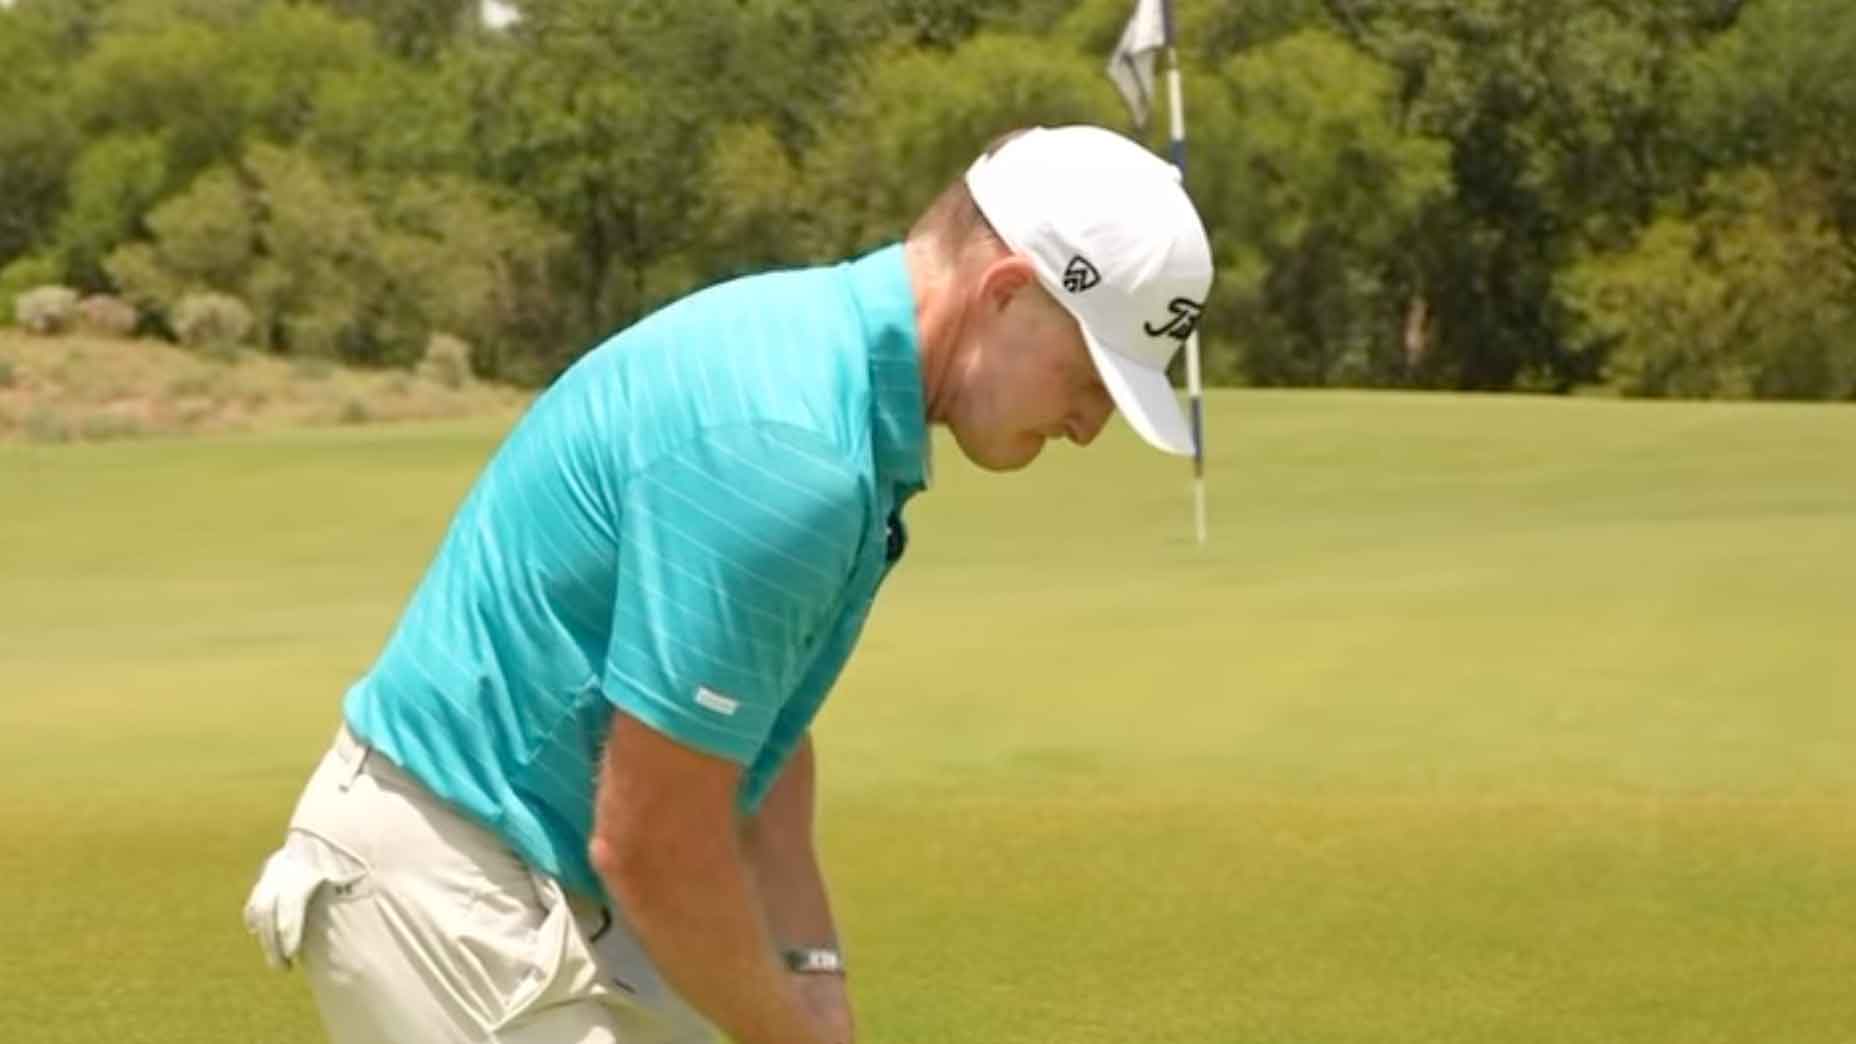 How to improve your chipping technique using the Texas wedge: Master the art of chipping with a putter!